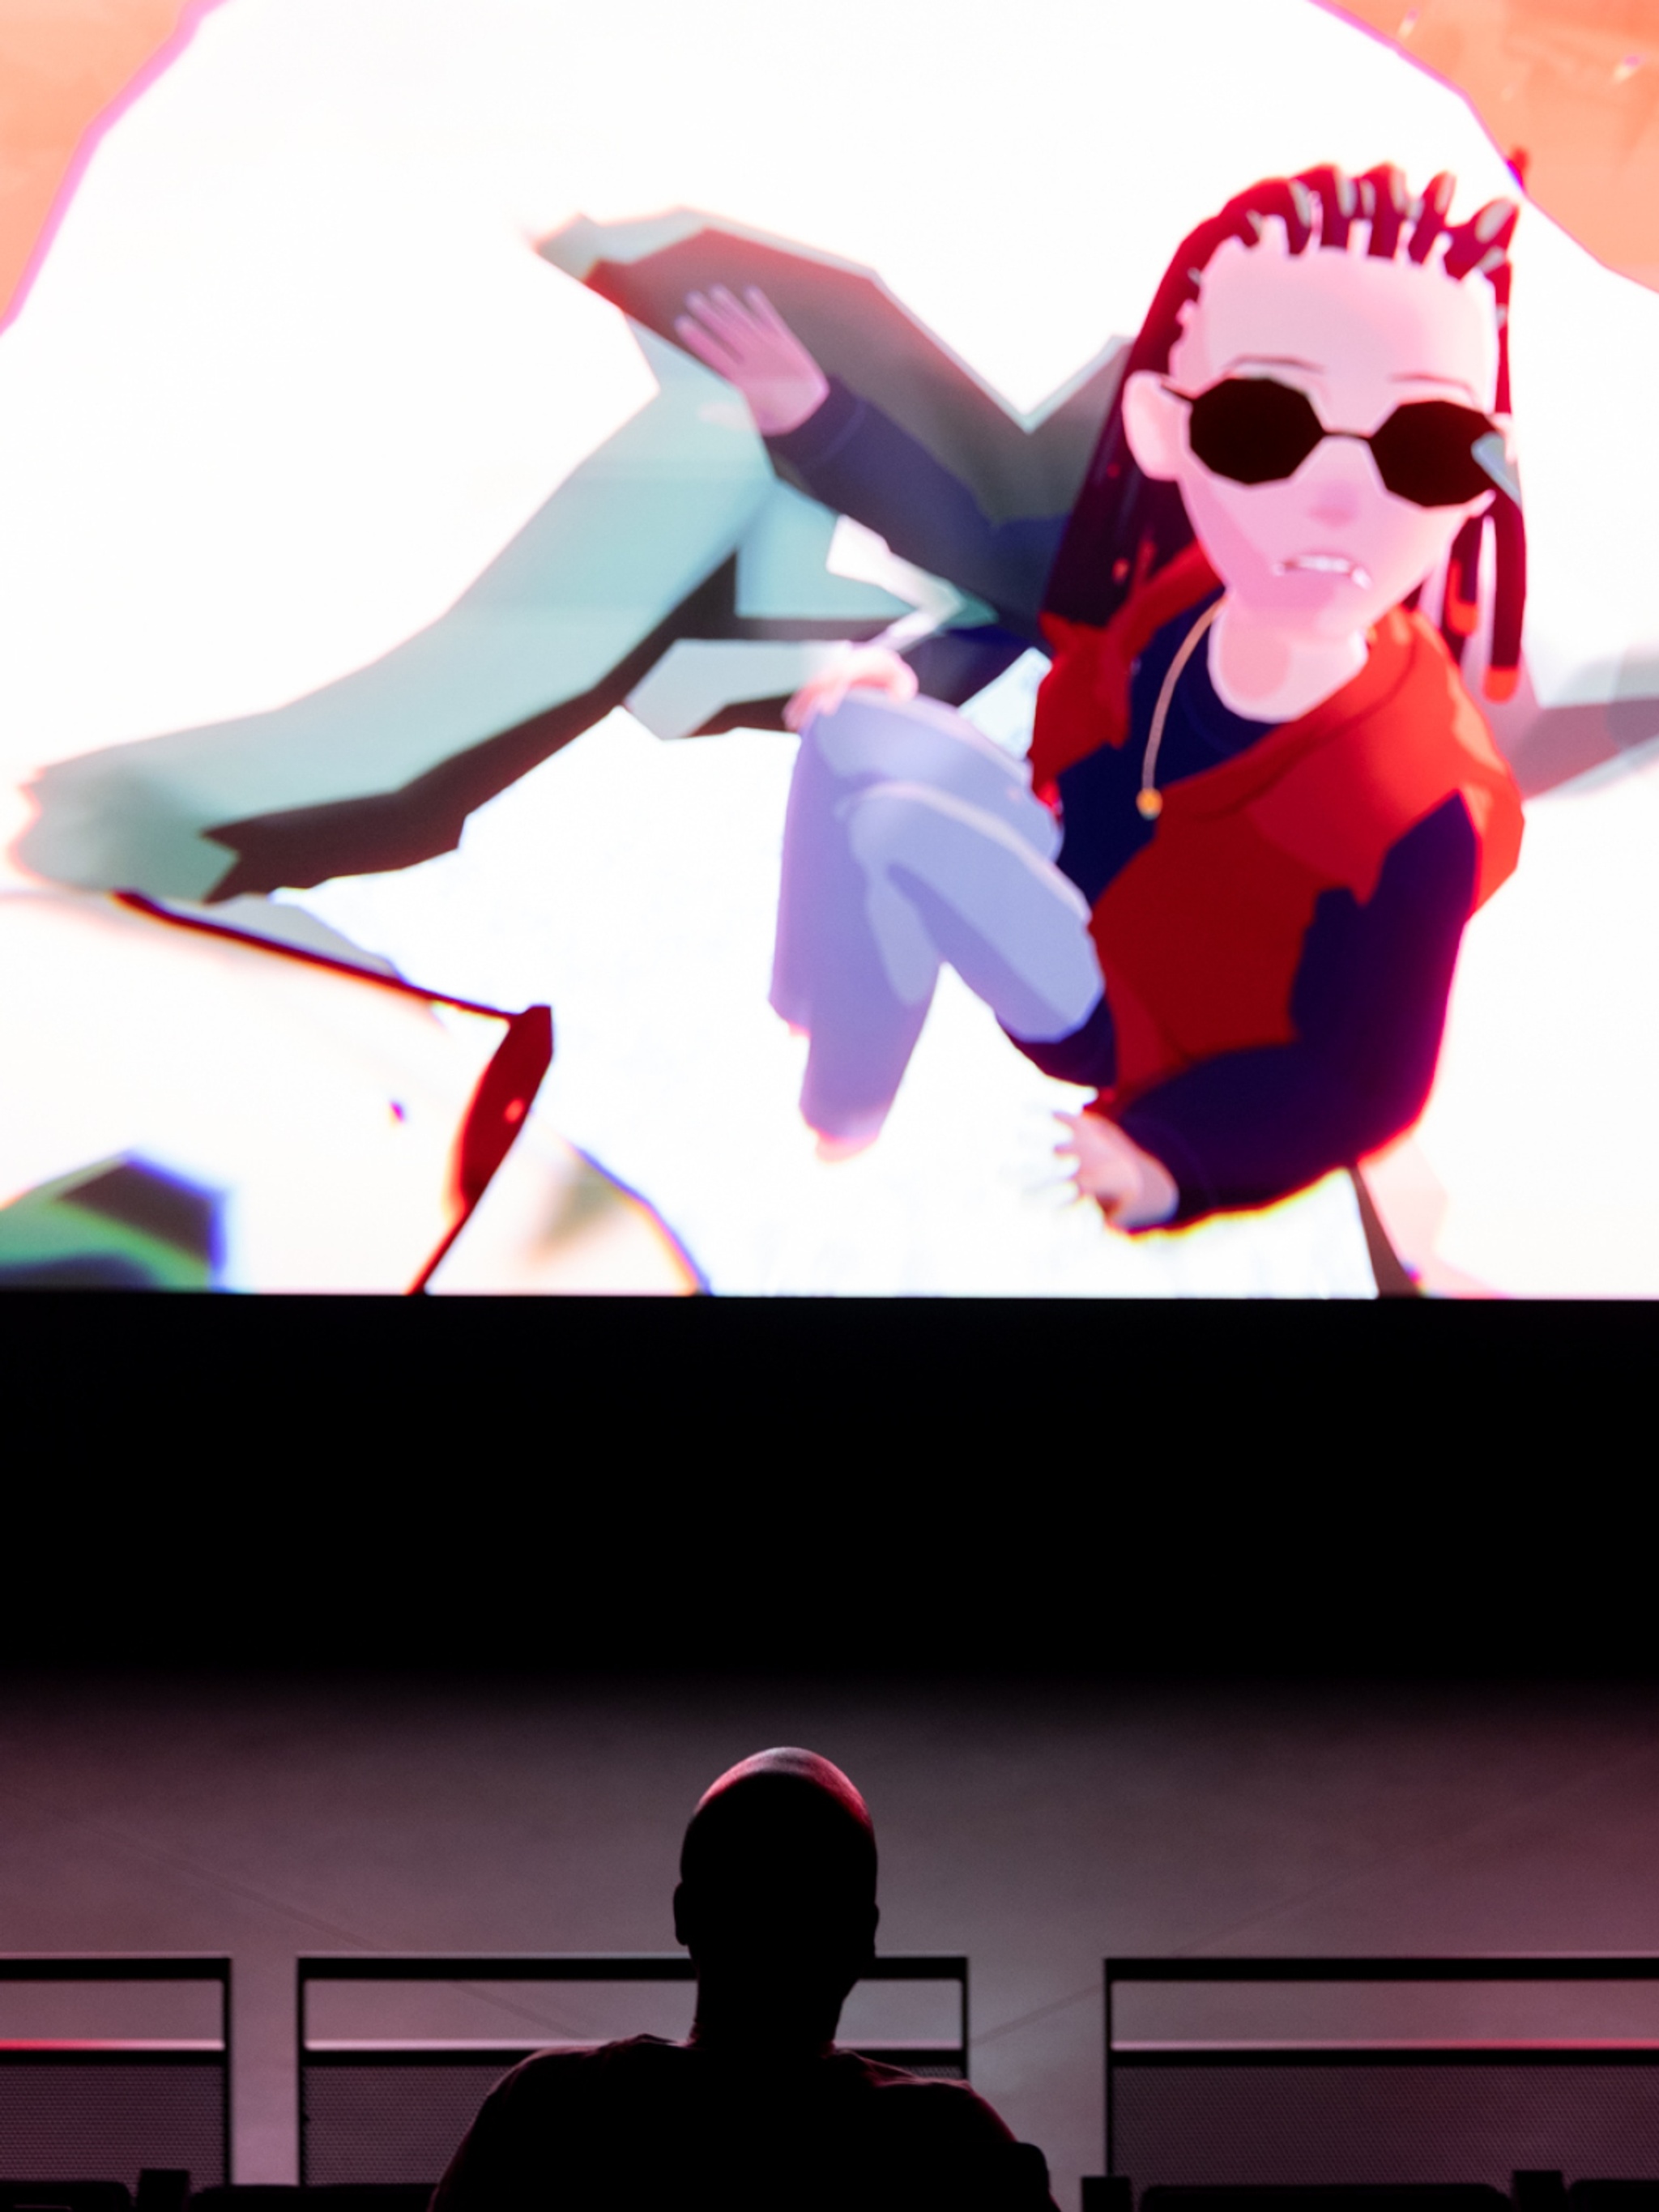 A film screen with a scene from an anime projected on it, with in the foreground the back of a viewer's head pictured from higher up in the cinema-style seating